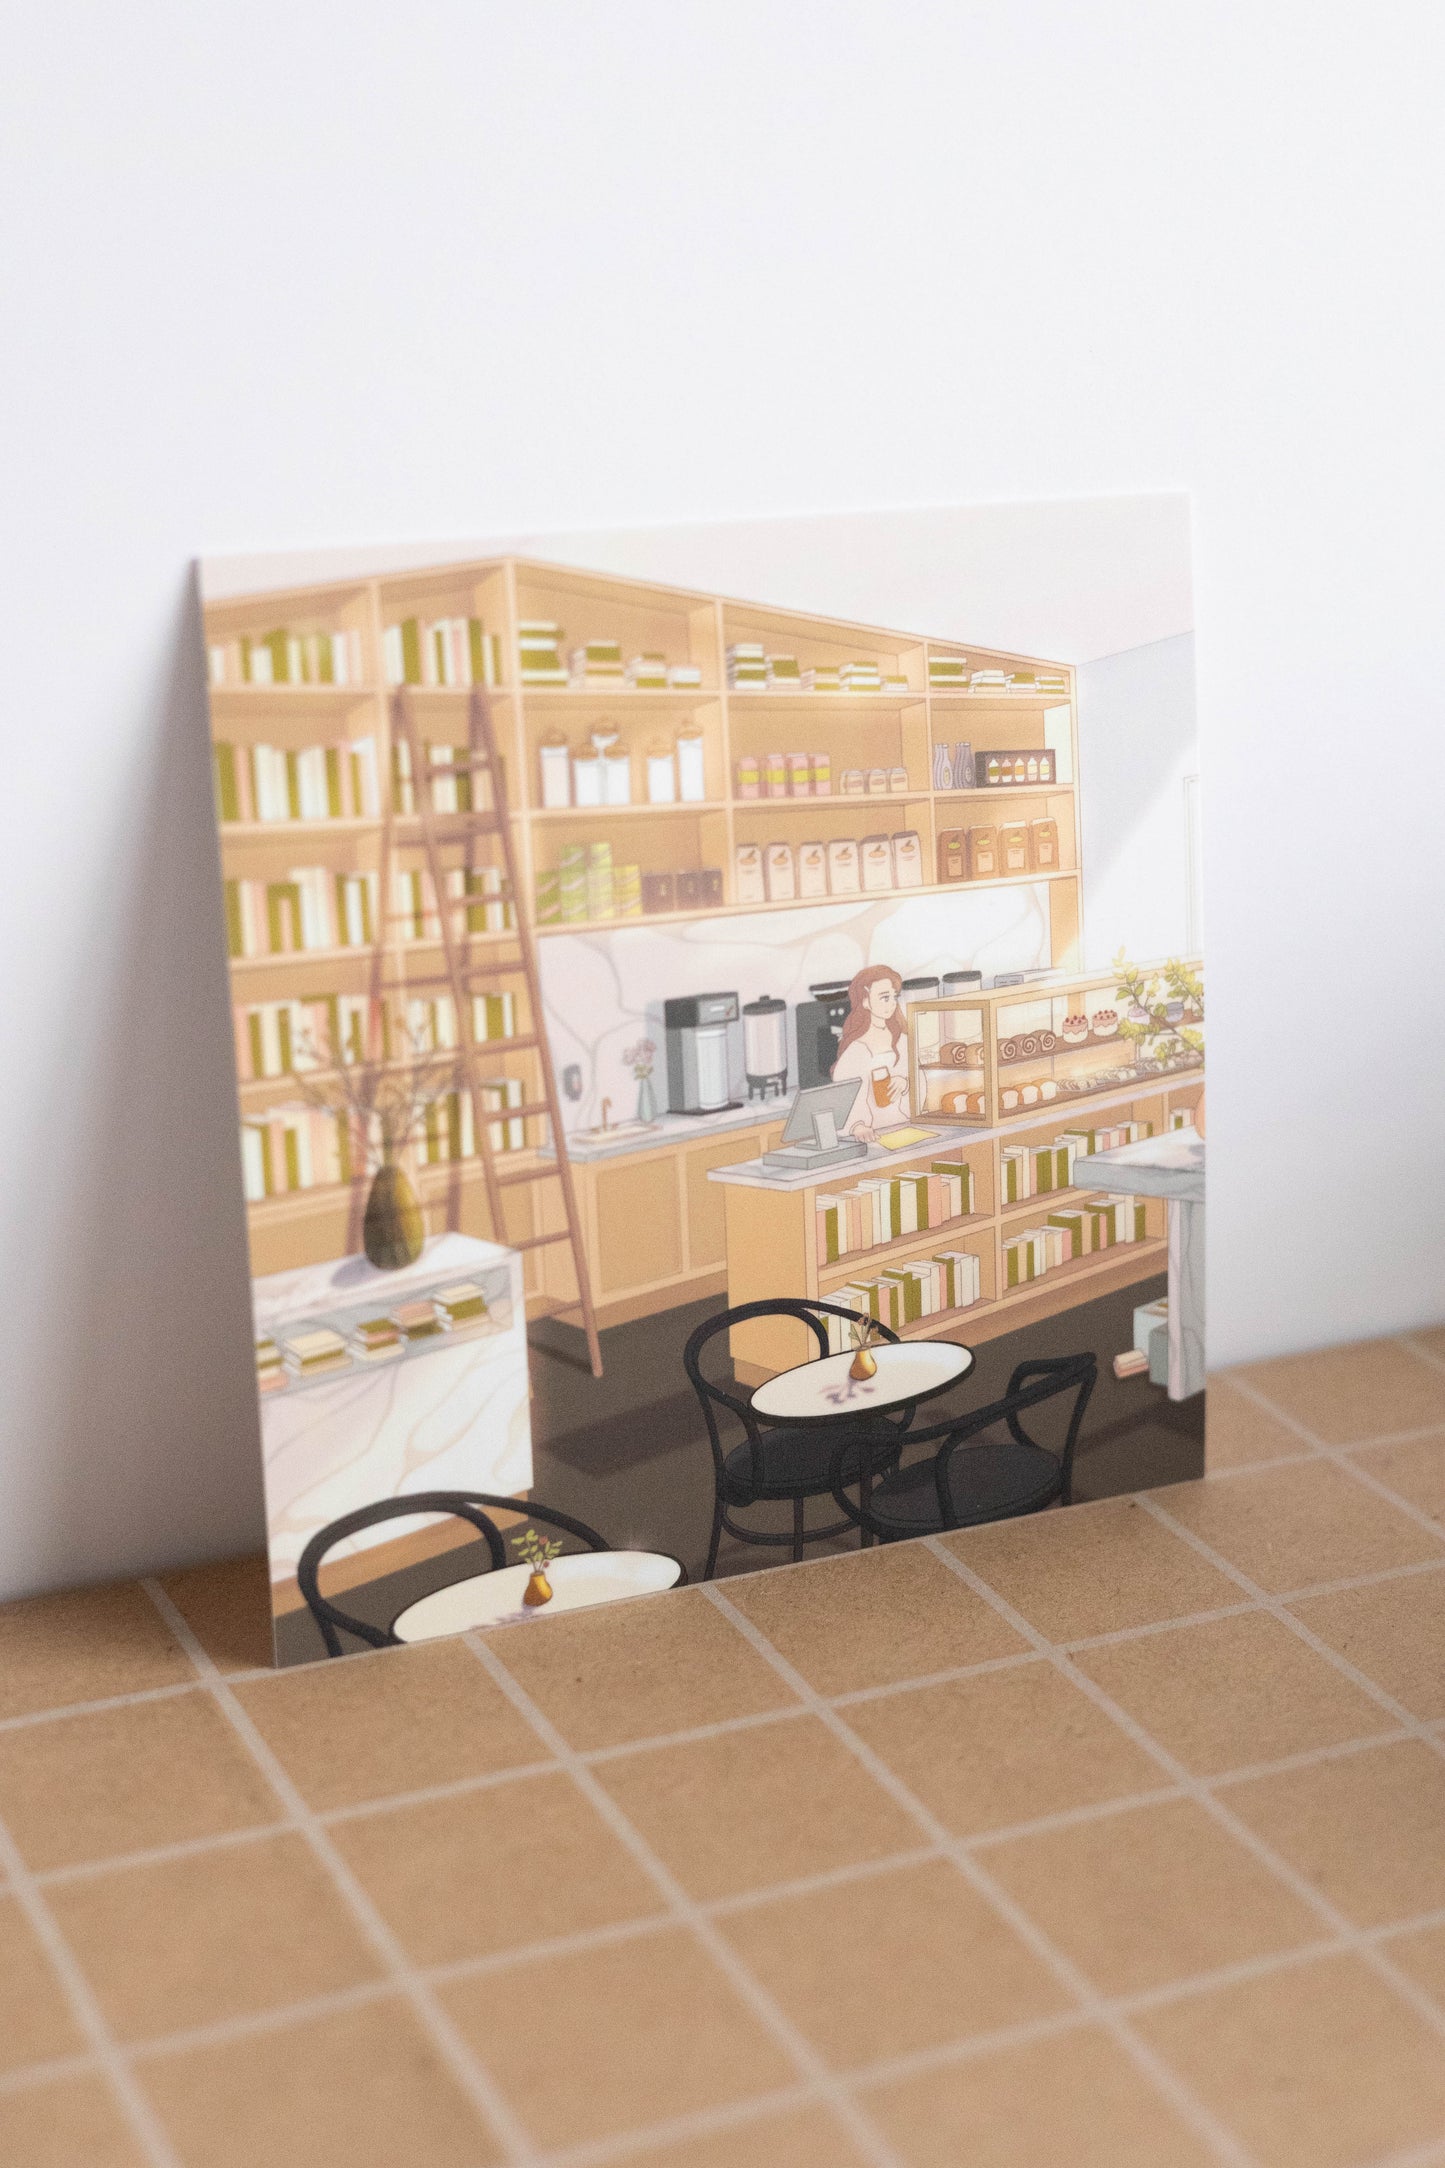 Library Cafe Art Print